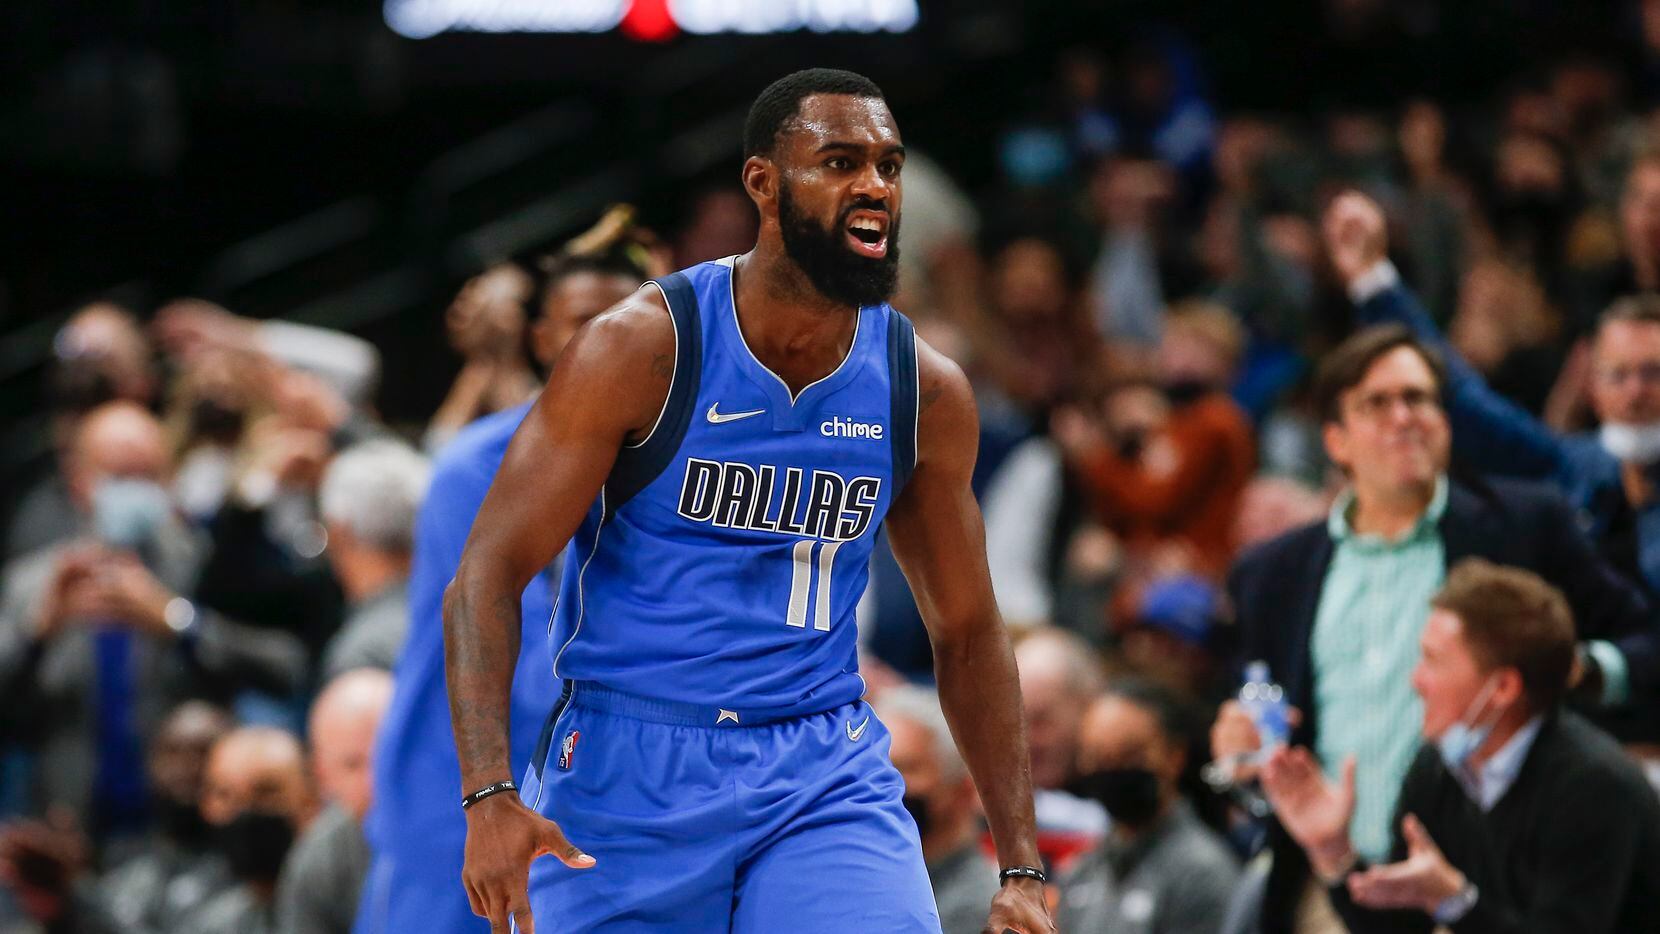 Dallas Mavericks forward Tim Hardaway Jr. (11) celebrates a three-point shot during the first half of an NBA basketball game against the Charlotte Hornets in Dallas, Monday, December 13, 2021. (Brandon Wade/Special Contributor)